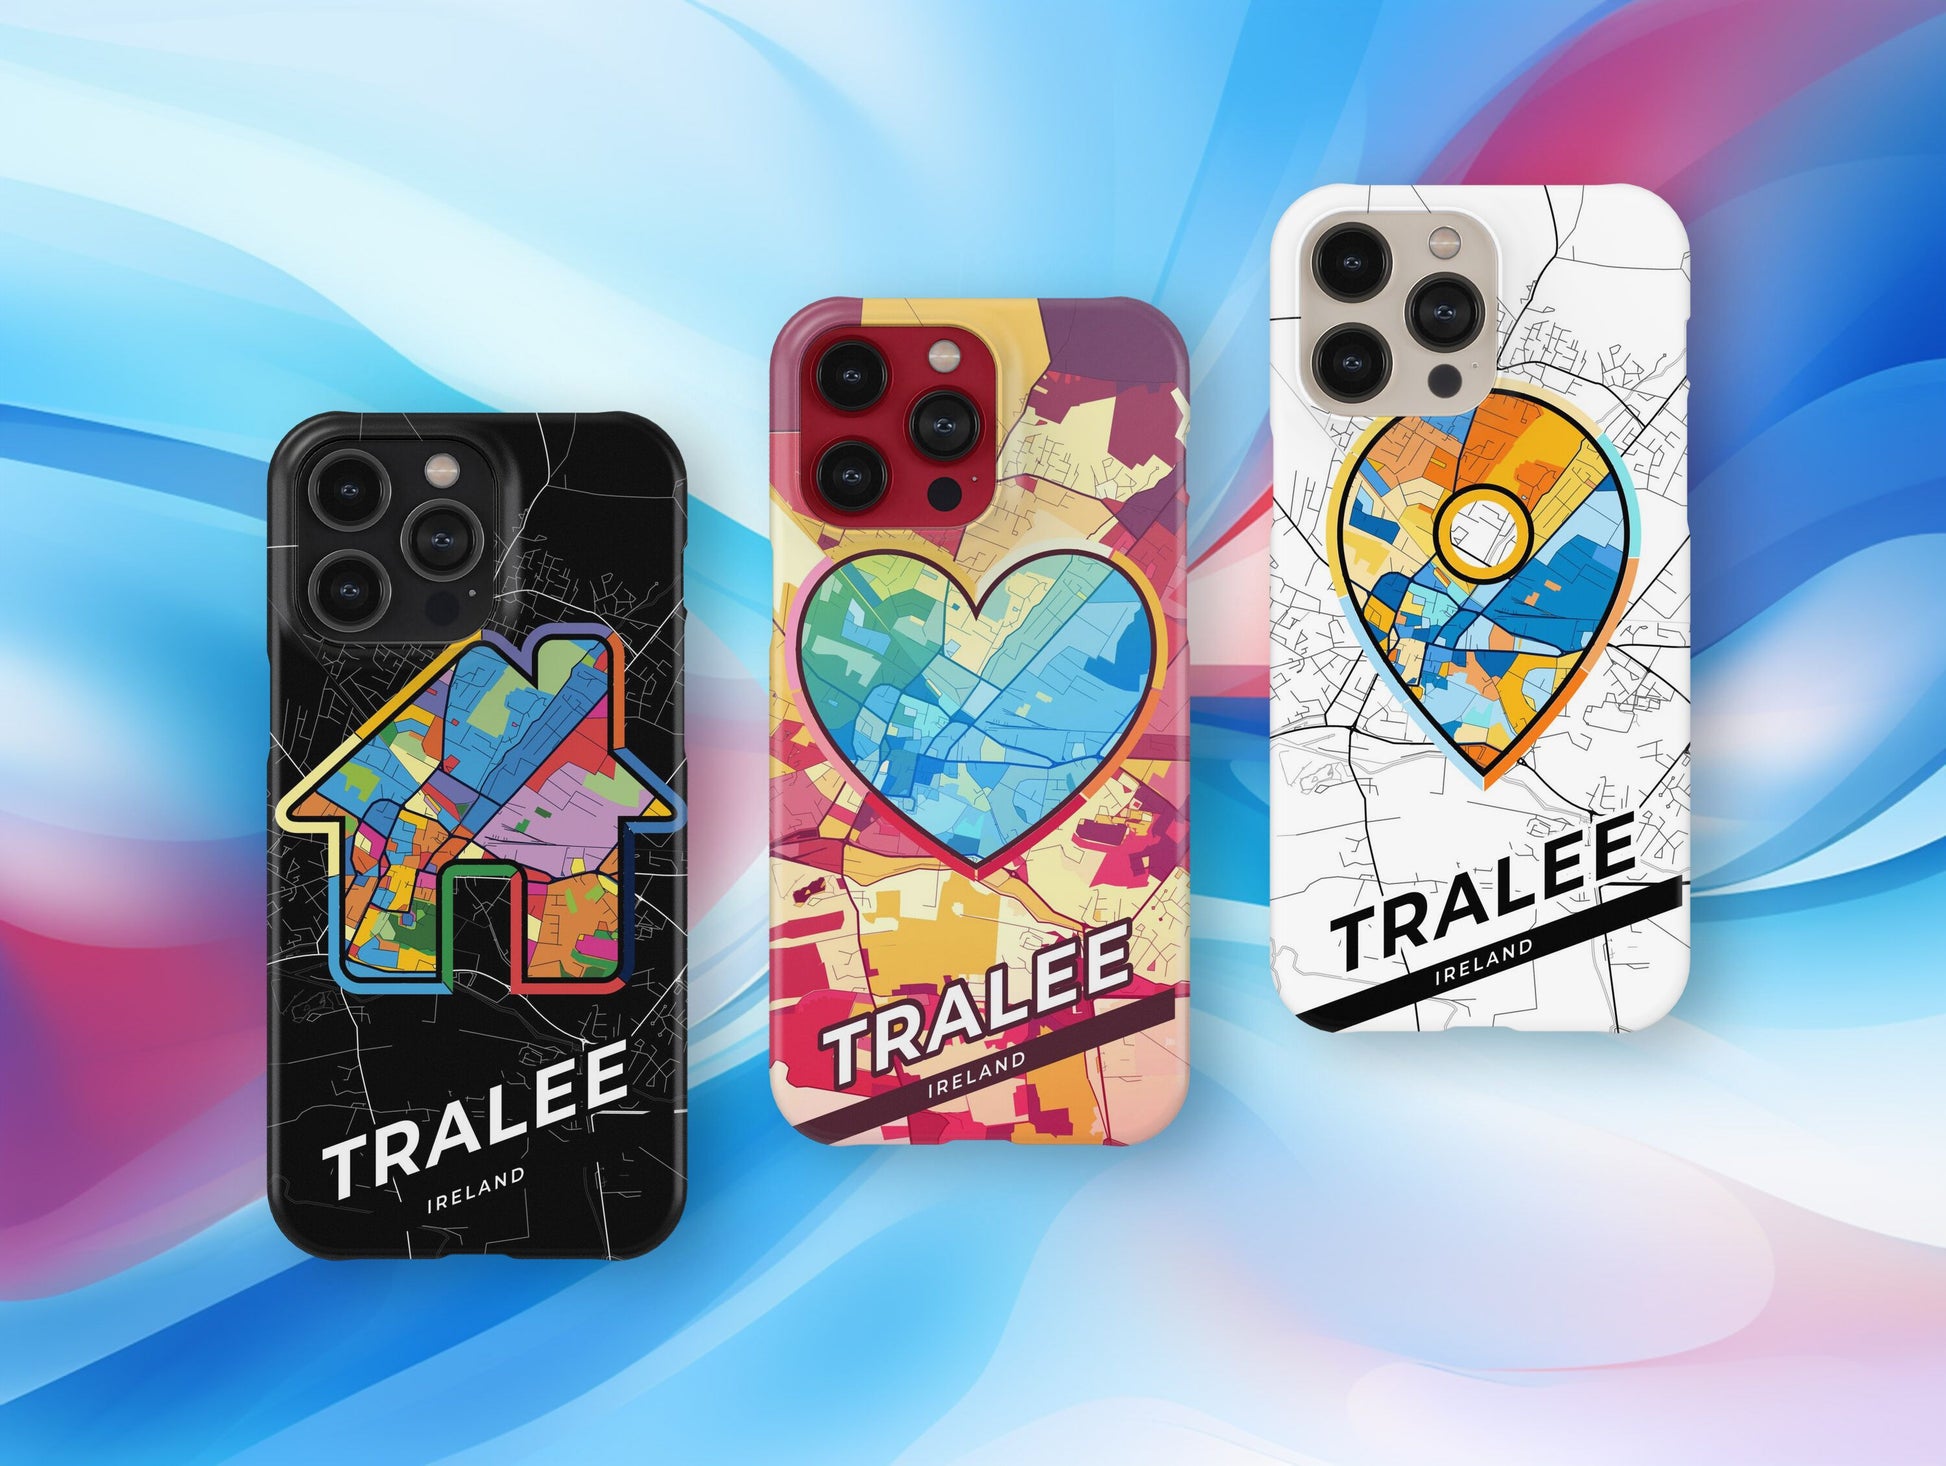 Tralee Ireland slim phone case with colorful icon